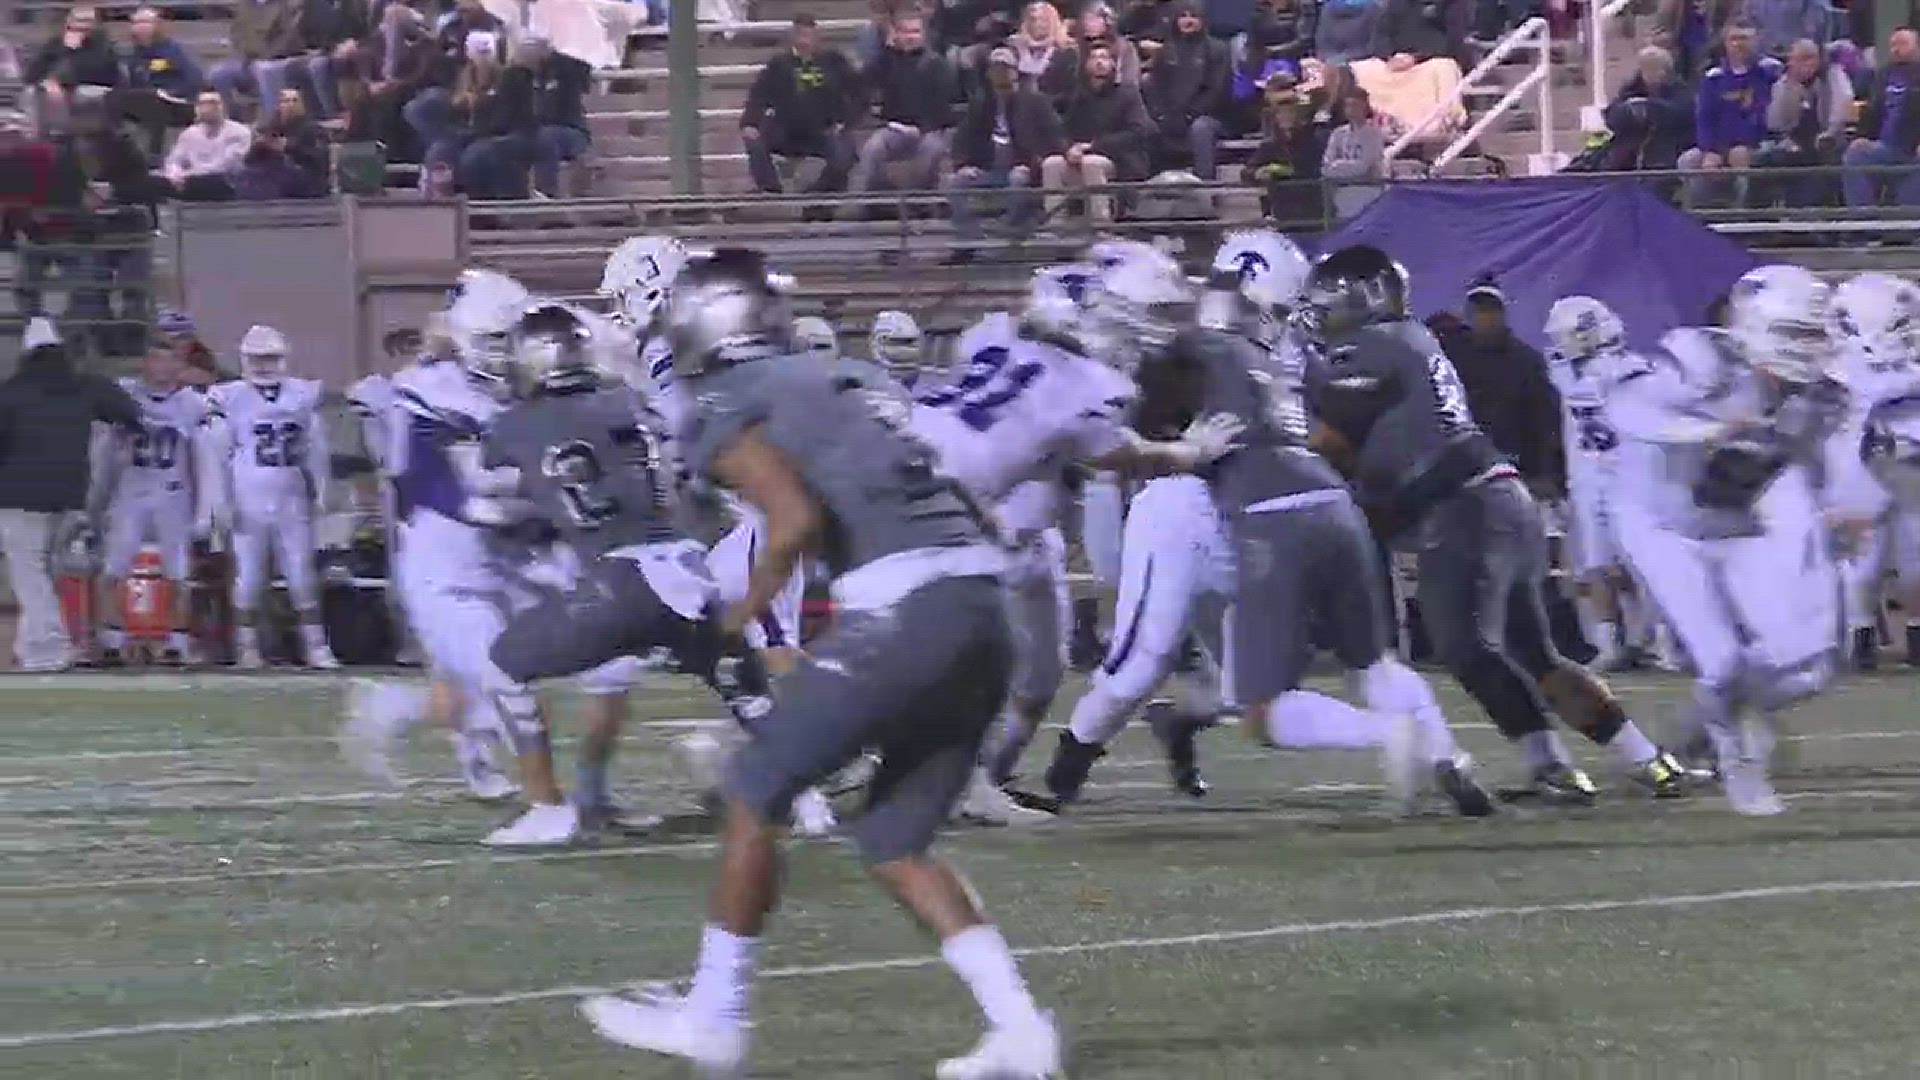 Highlights of Sumner's 42-14 win over Union in the second round of the playoffs on Nov. 10, 2017.